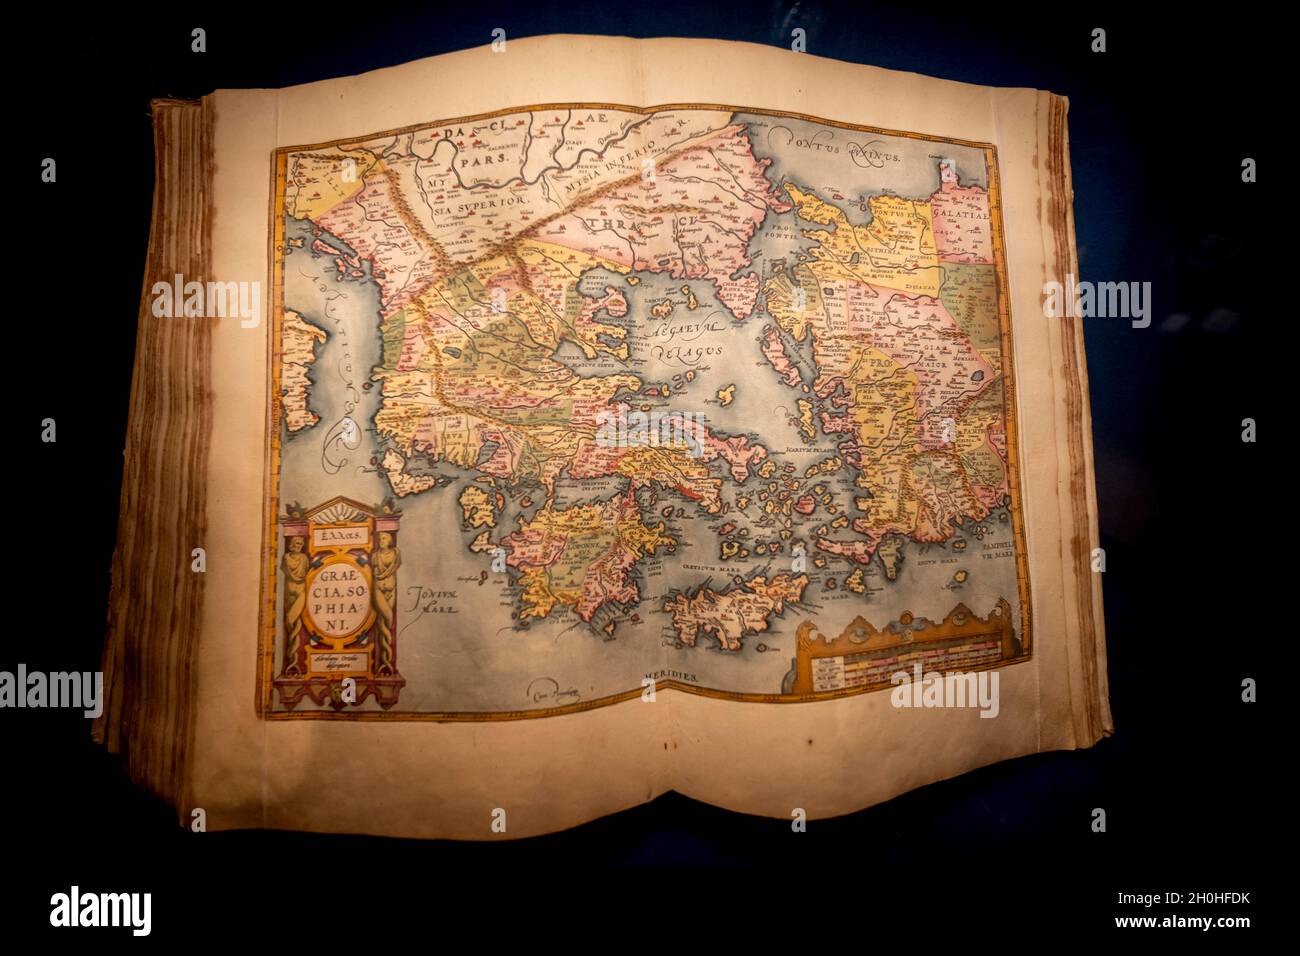 Antique book with an old map of Greece, Museo Correr, Venice, Veneto, Italy Stock Photo